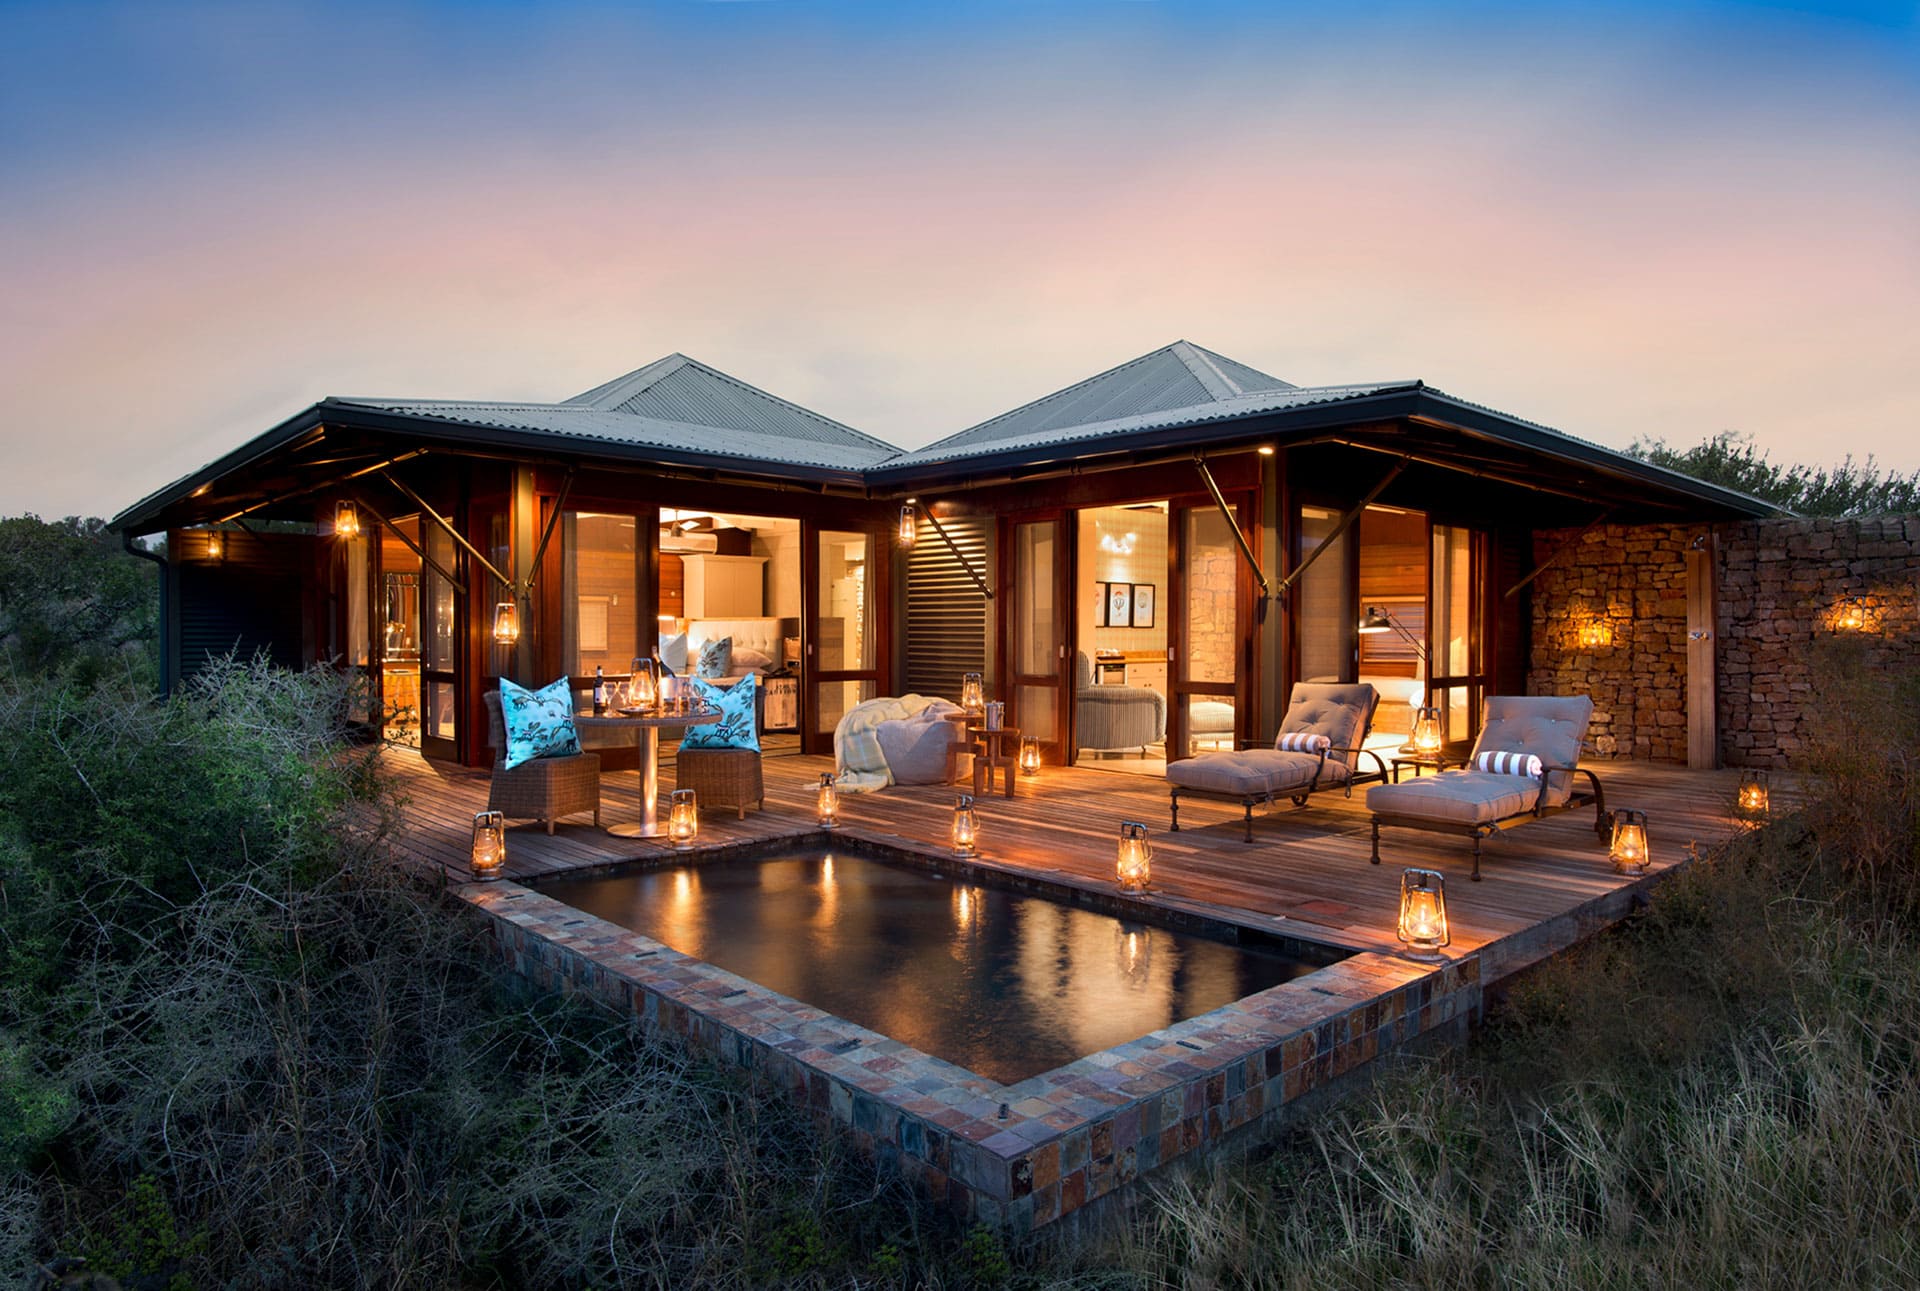 KWANDWE PRIVATE GAME RESERVE - Ecca Lodge - Suite exterior with private plunge pool